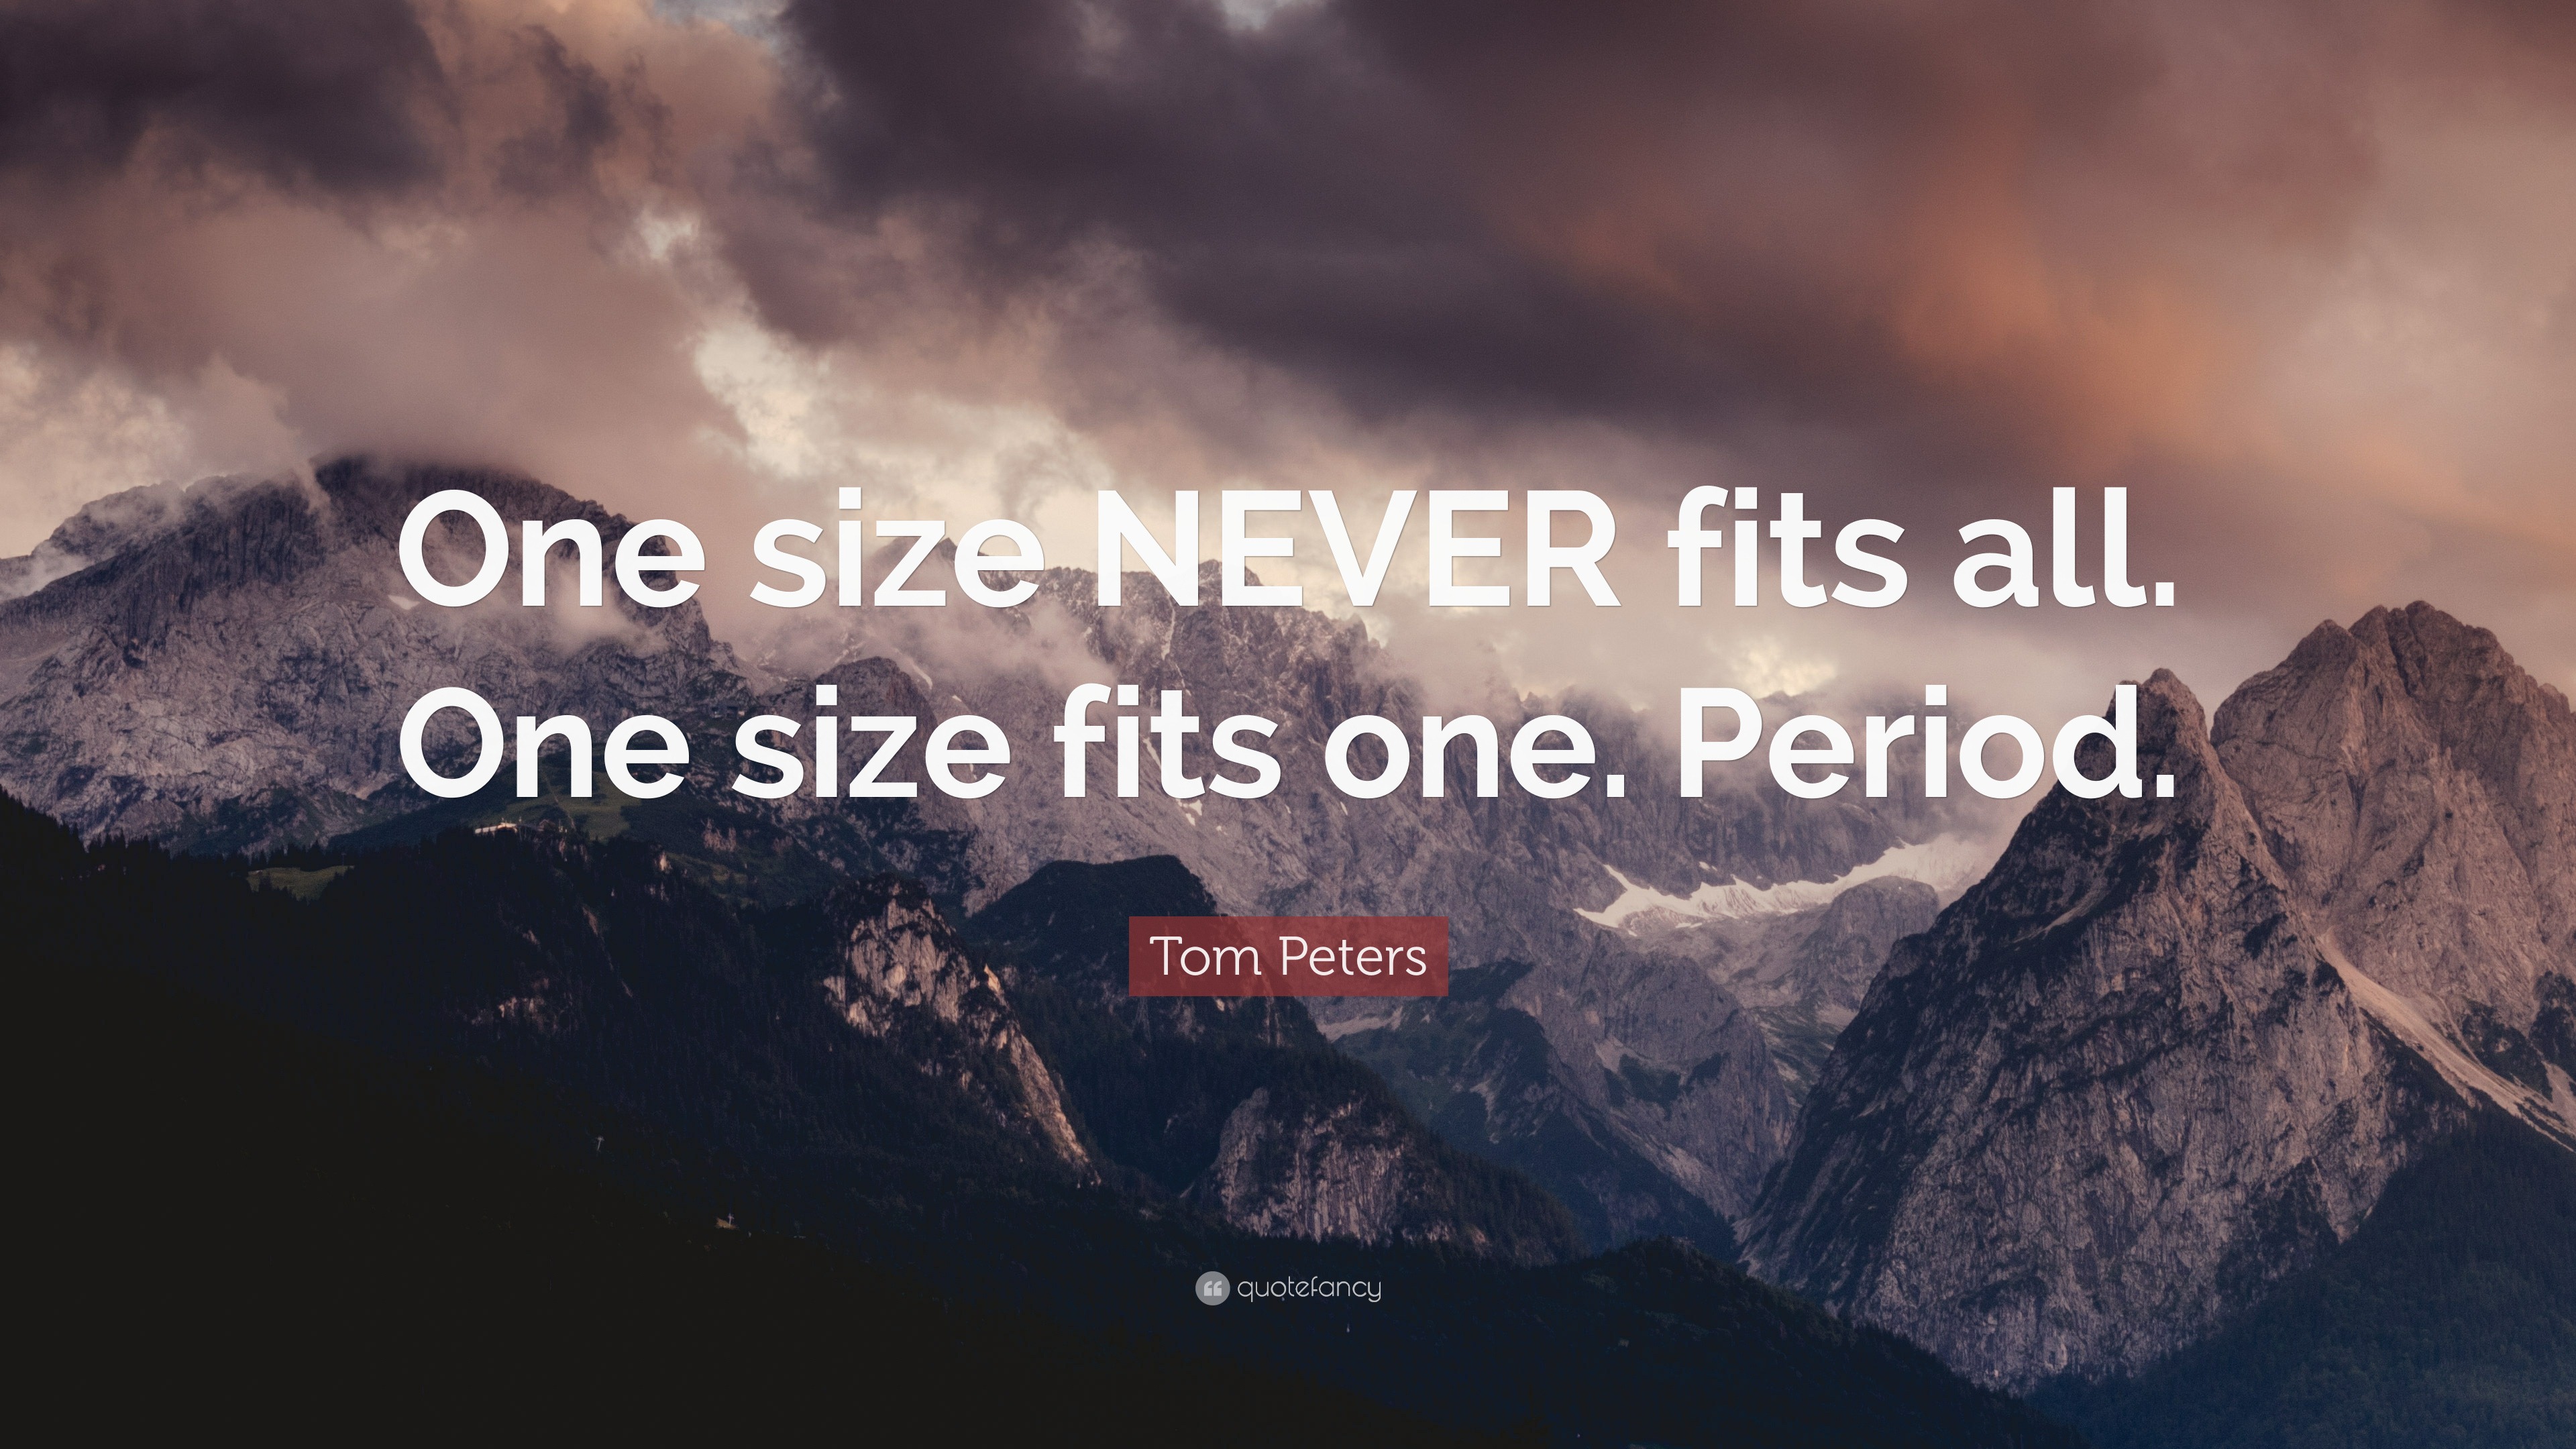 https://quotefancy.com/media/wallpaper/3840x2160/3877682-Tom-Peters-Quote-One-size-NEVER-fits-all-One-size-fits-one-Period.jpg